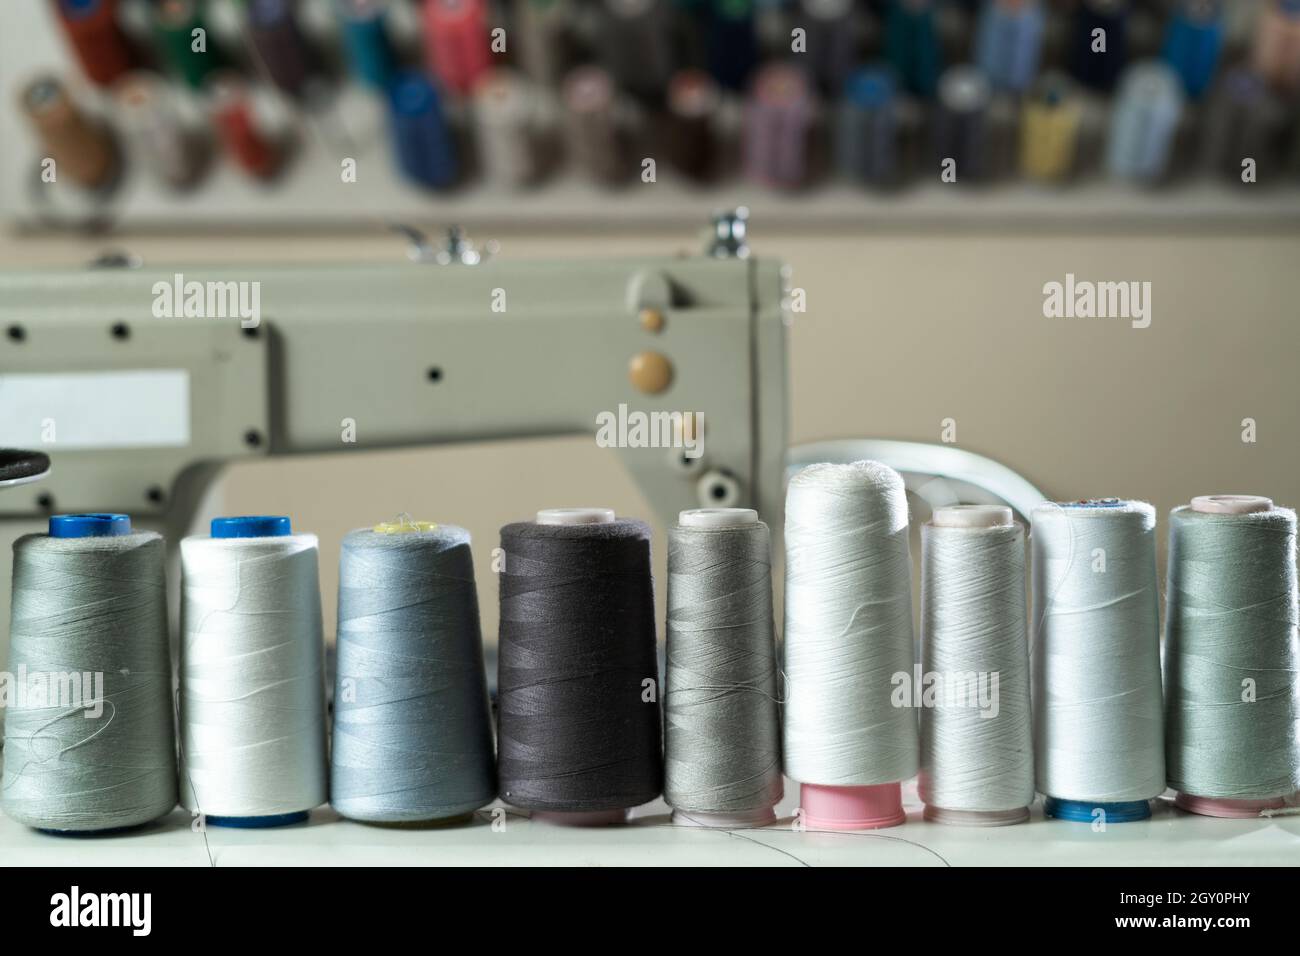 Several colored spools of thread for sewing and embroidery on a white wooden table. Stock Photo